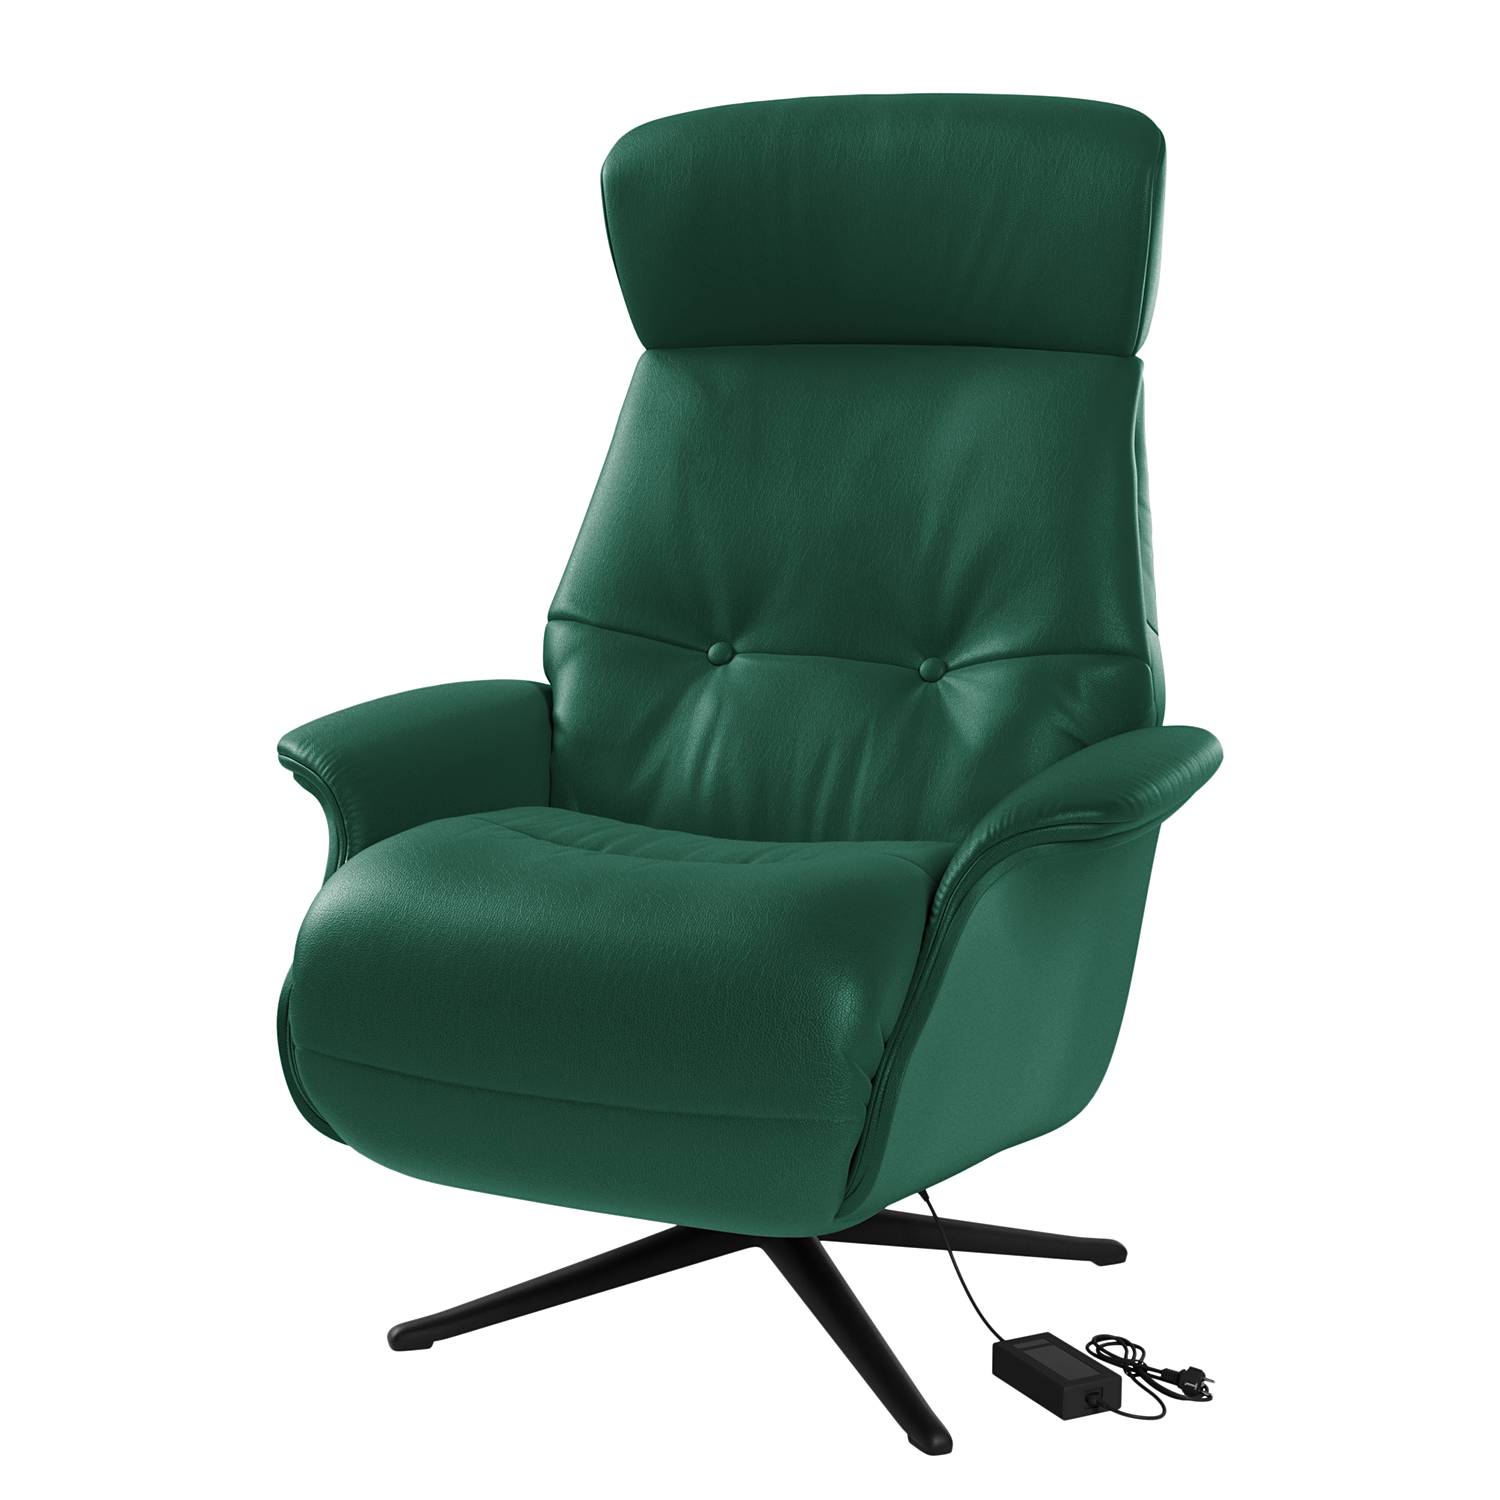 Image of Fauteuil relax Anderson VI 000000001000131451